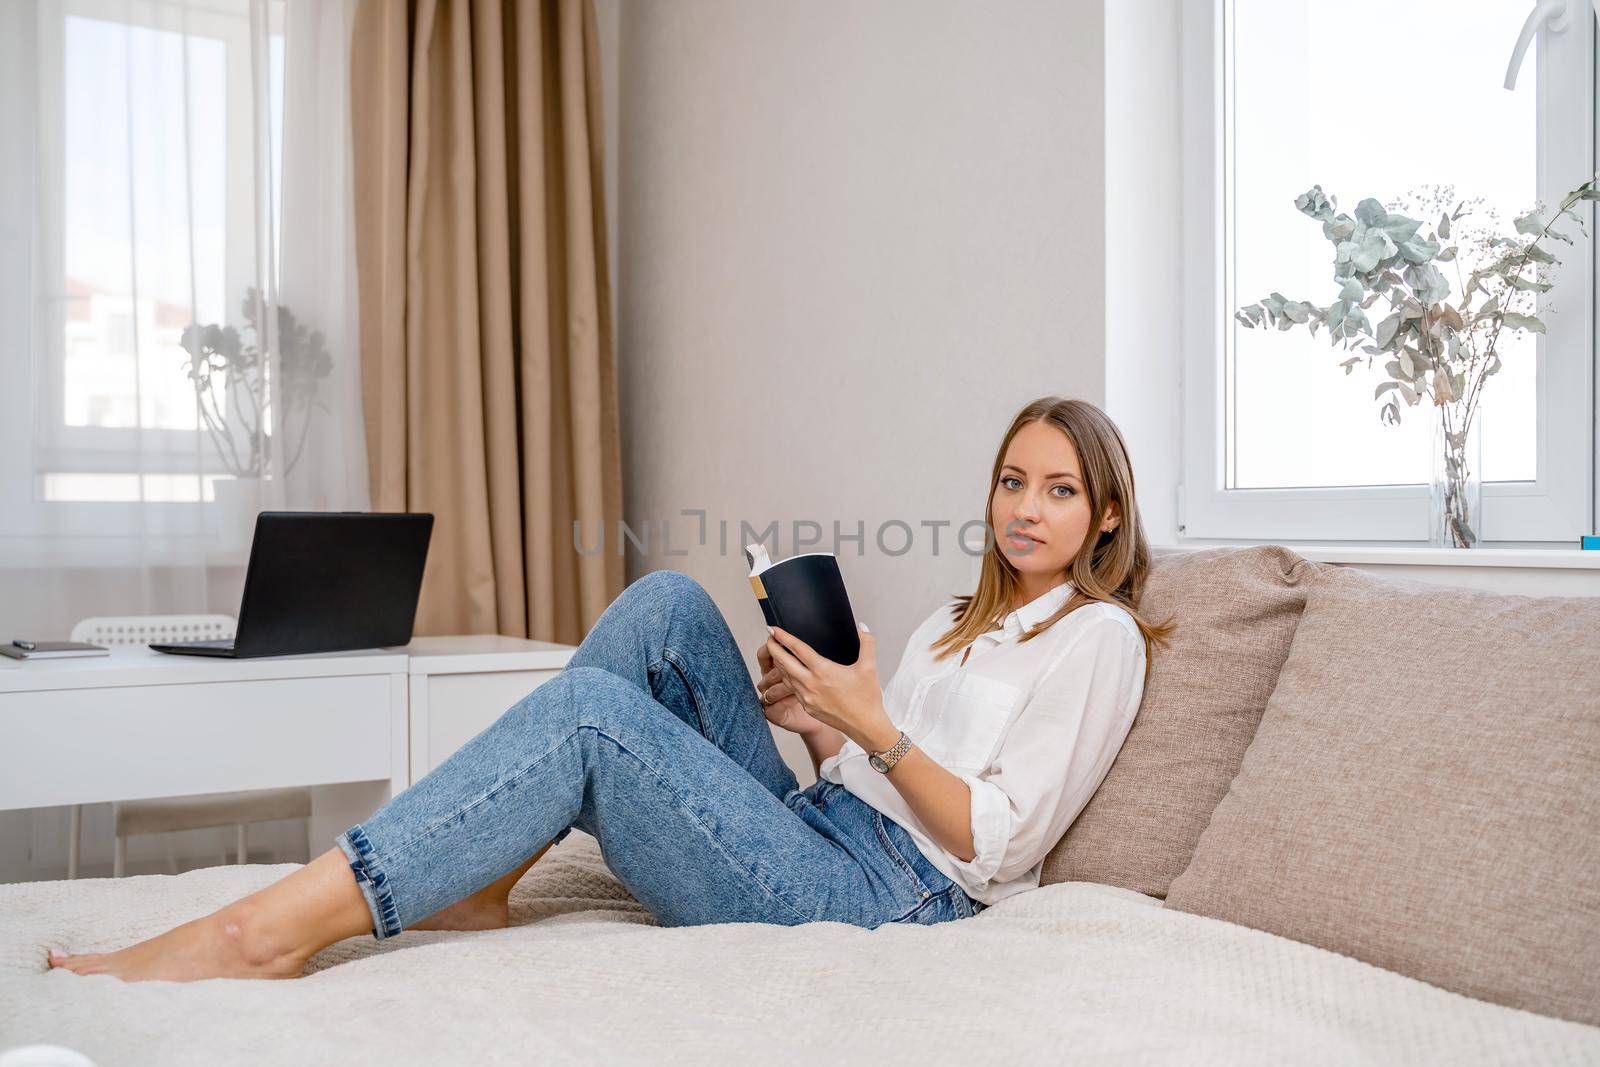 White cozy bed and a beautiful girl in a white shirt and jeans reading a book, the concept of home and comfort. Against the background of the living room, computer and window. by Matiunina